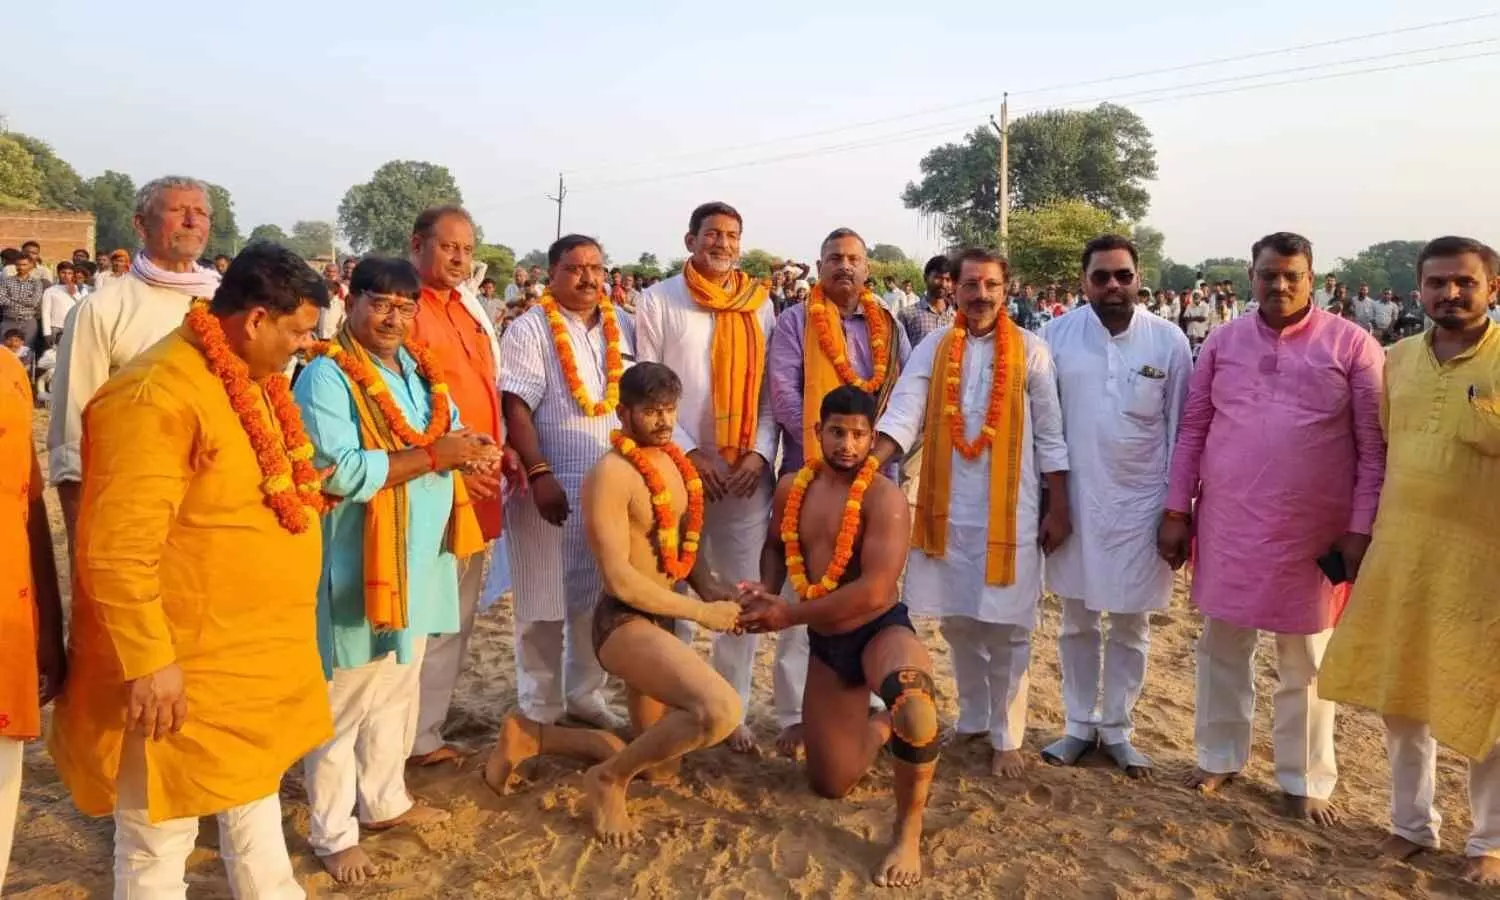 Wrestlers participated in the Dangal organized in Chitrakoot